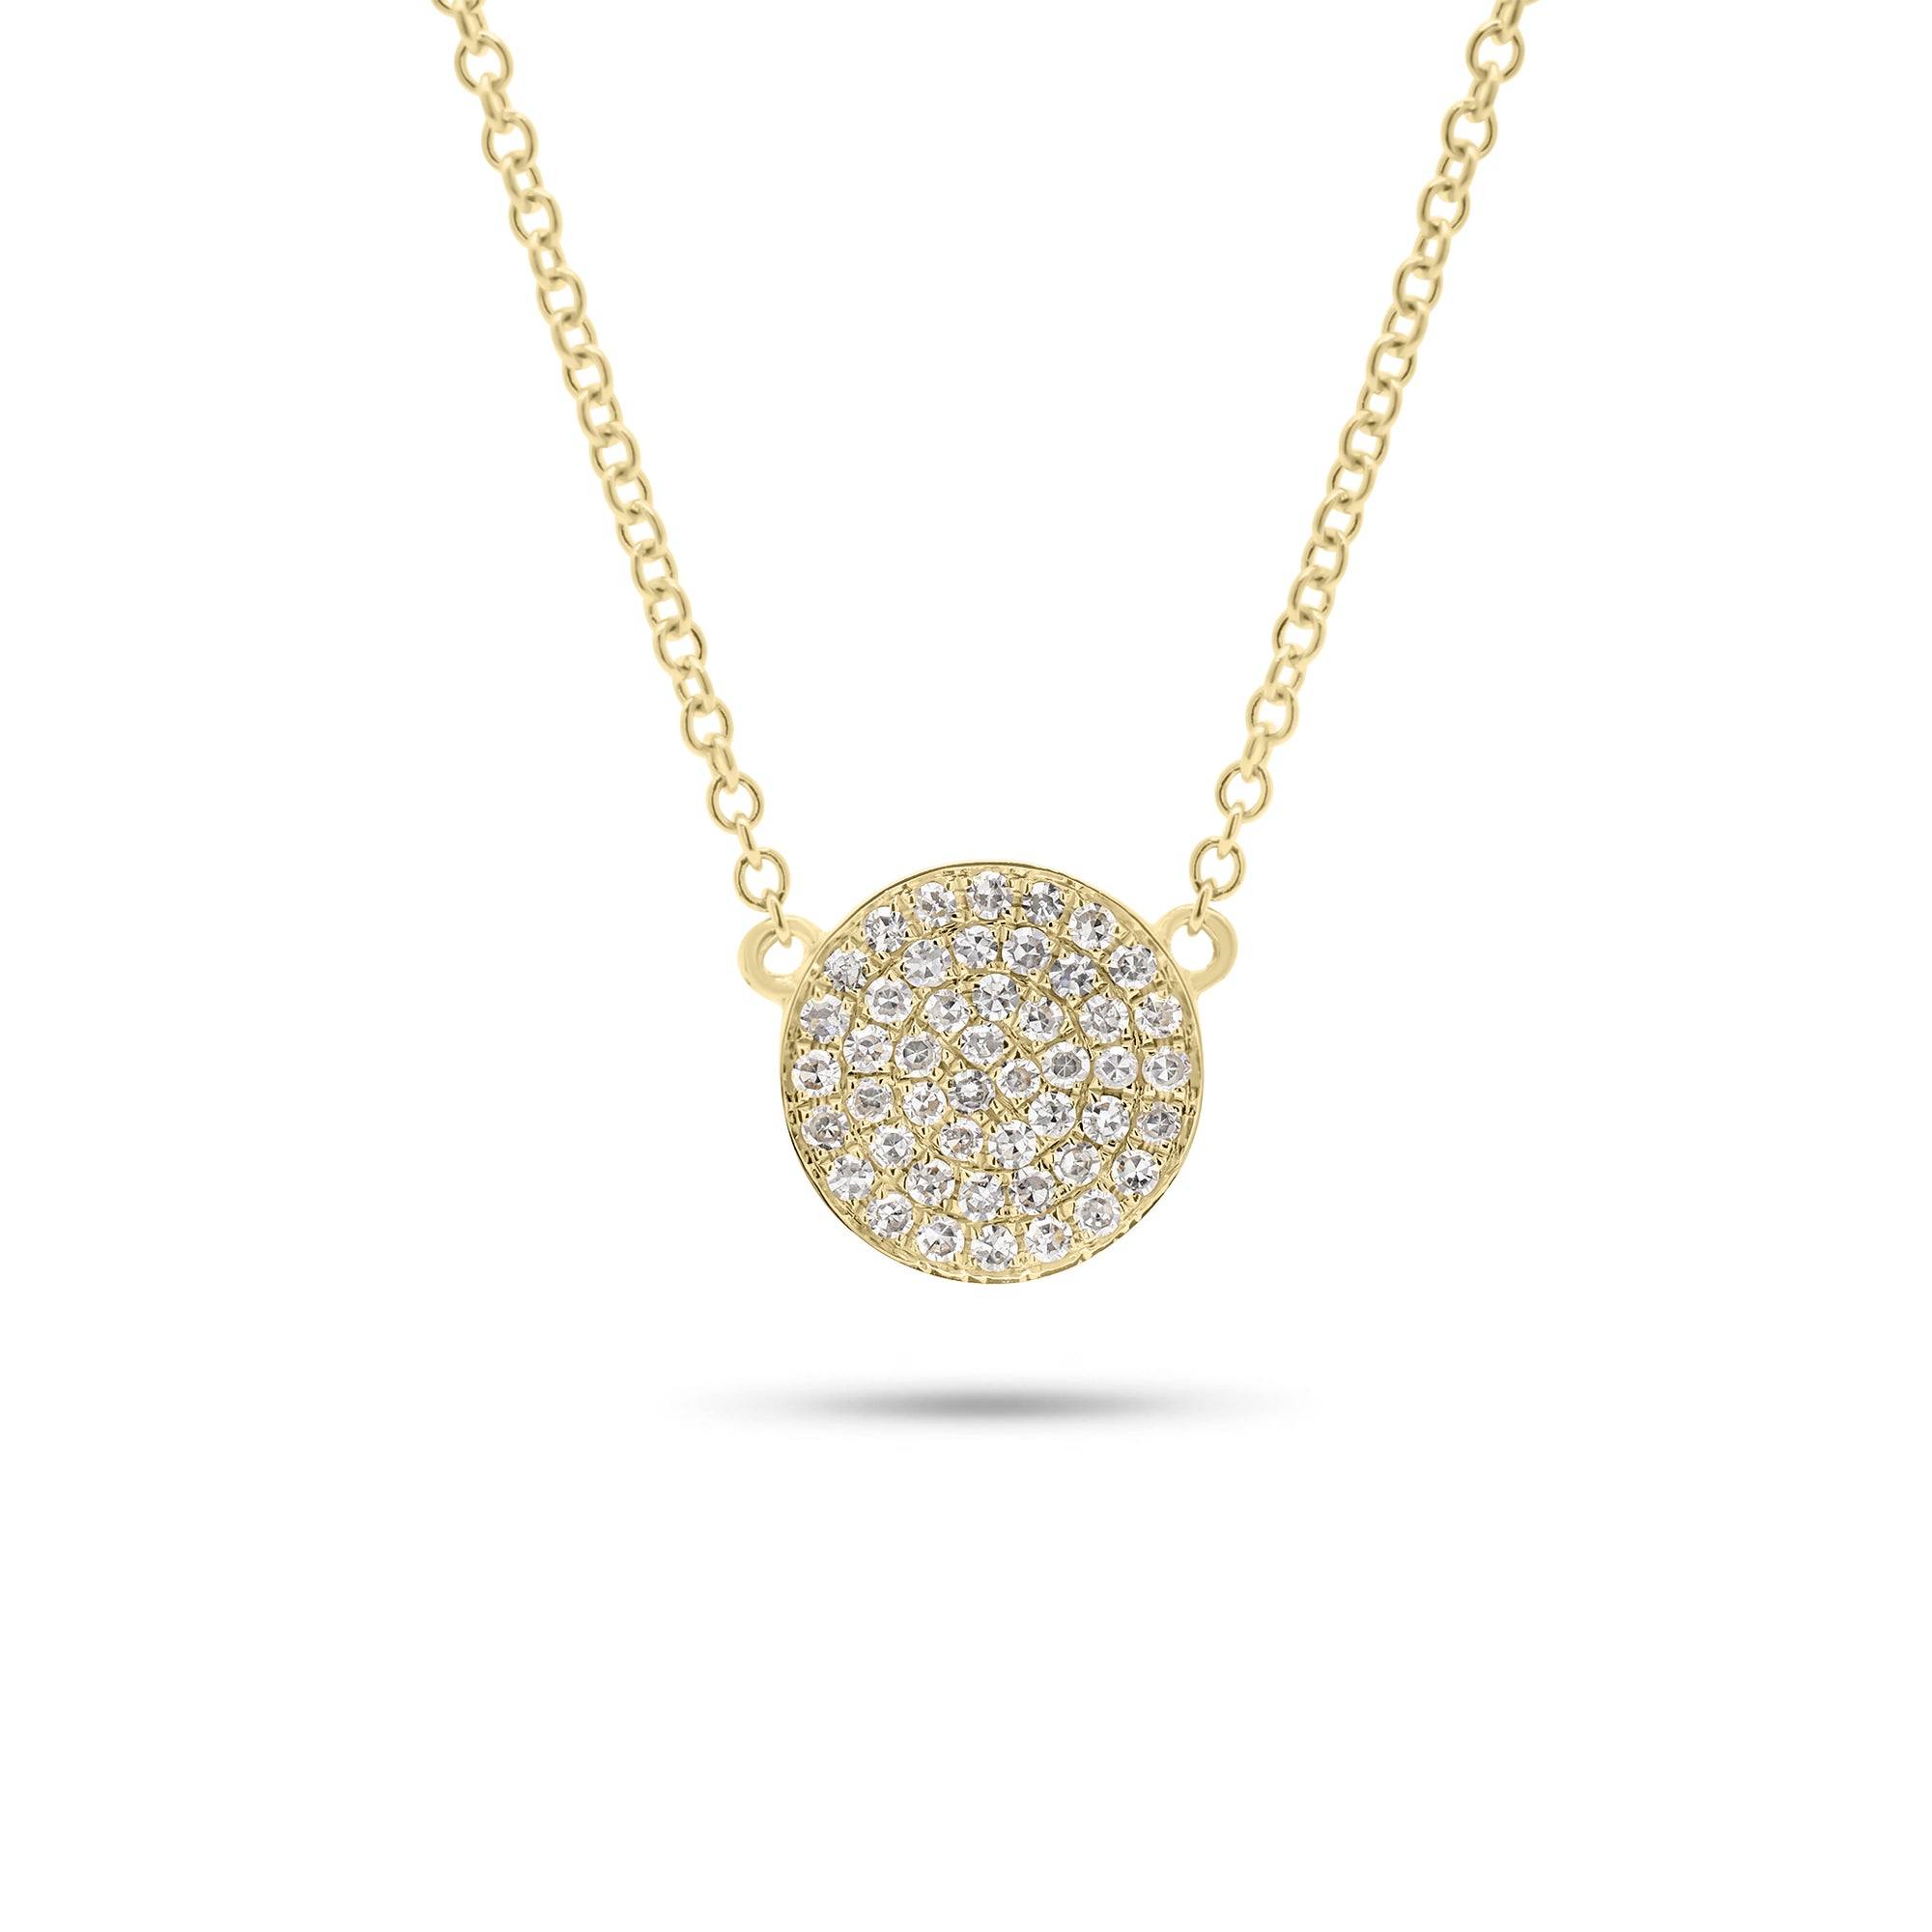 0.15 ct diamond disc pendant necklace 14K gold weighing 2.06 grams  - 47 round diamonds weighing 0.15 carats